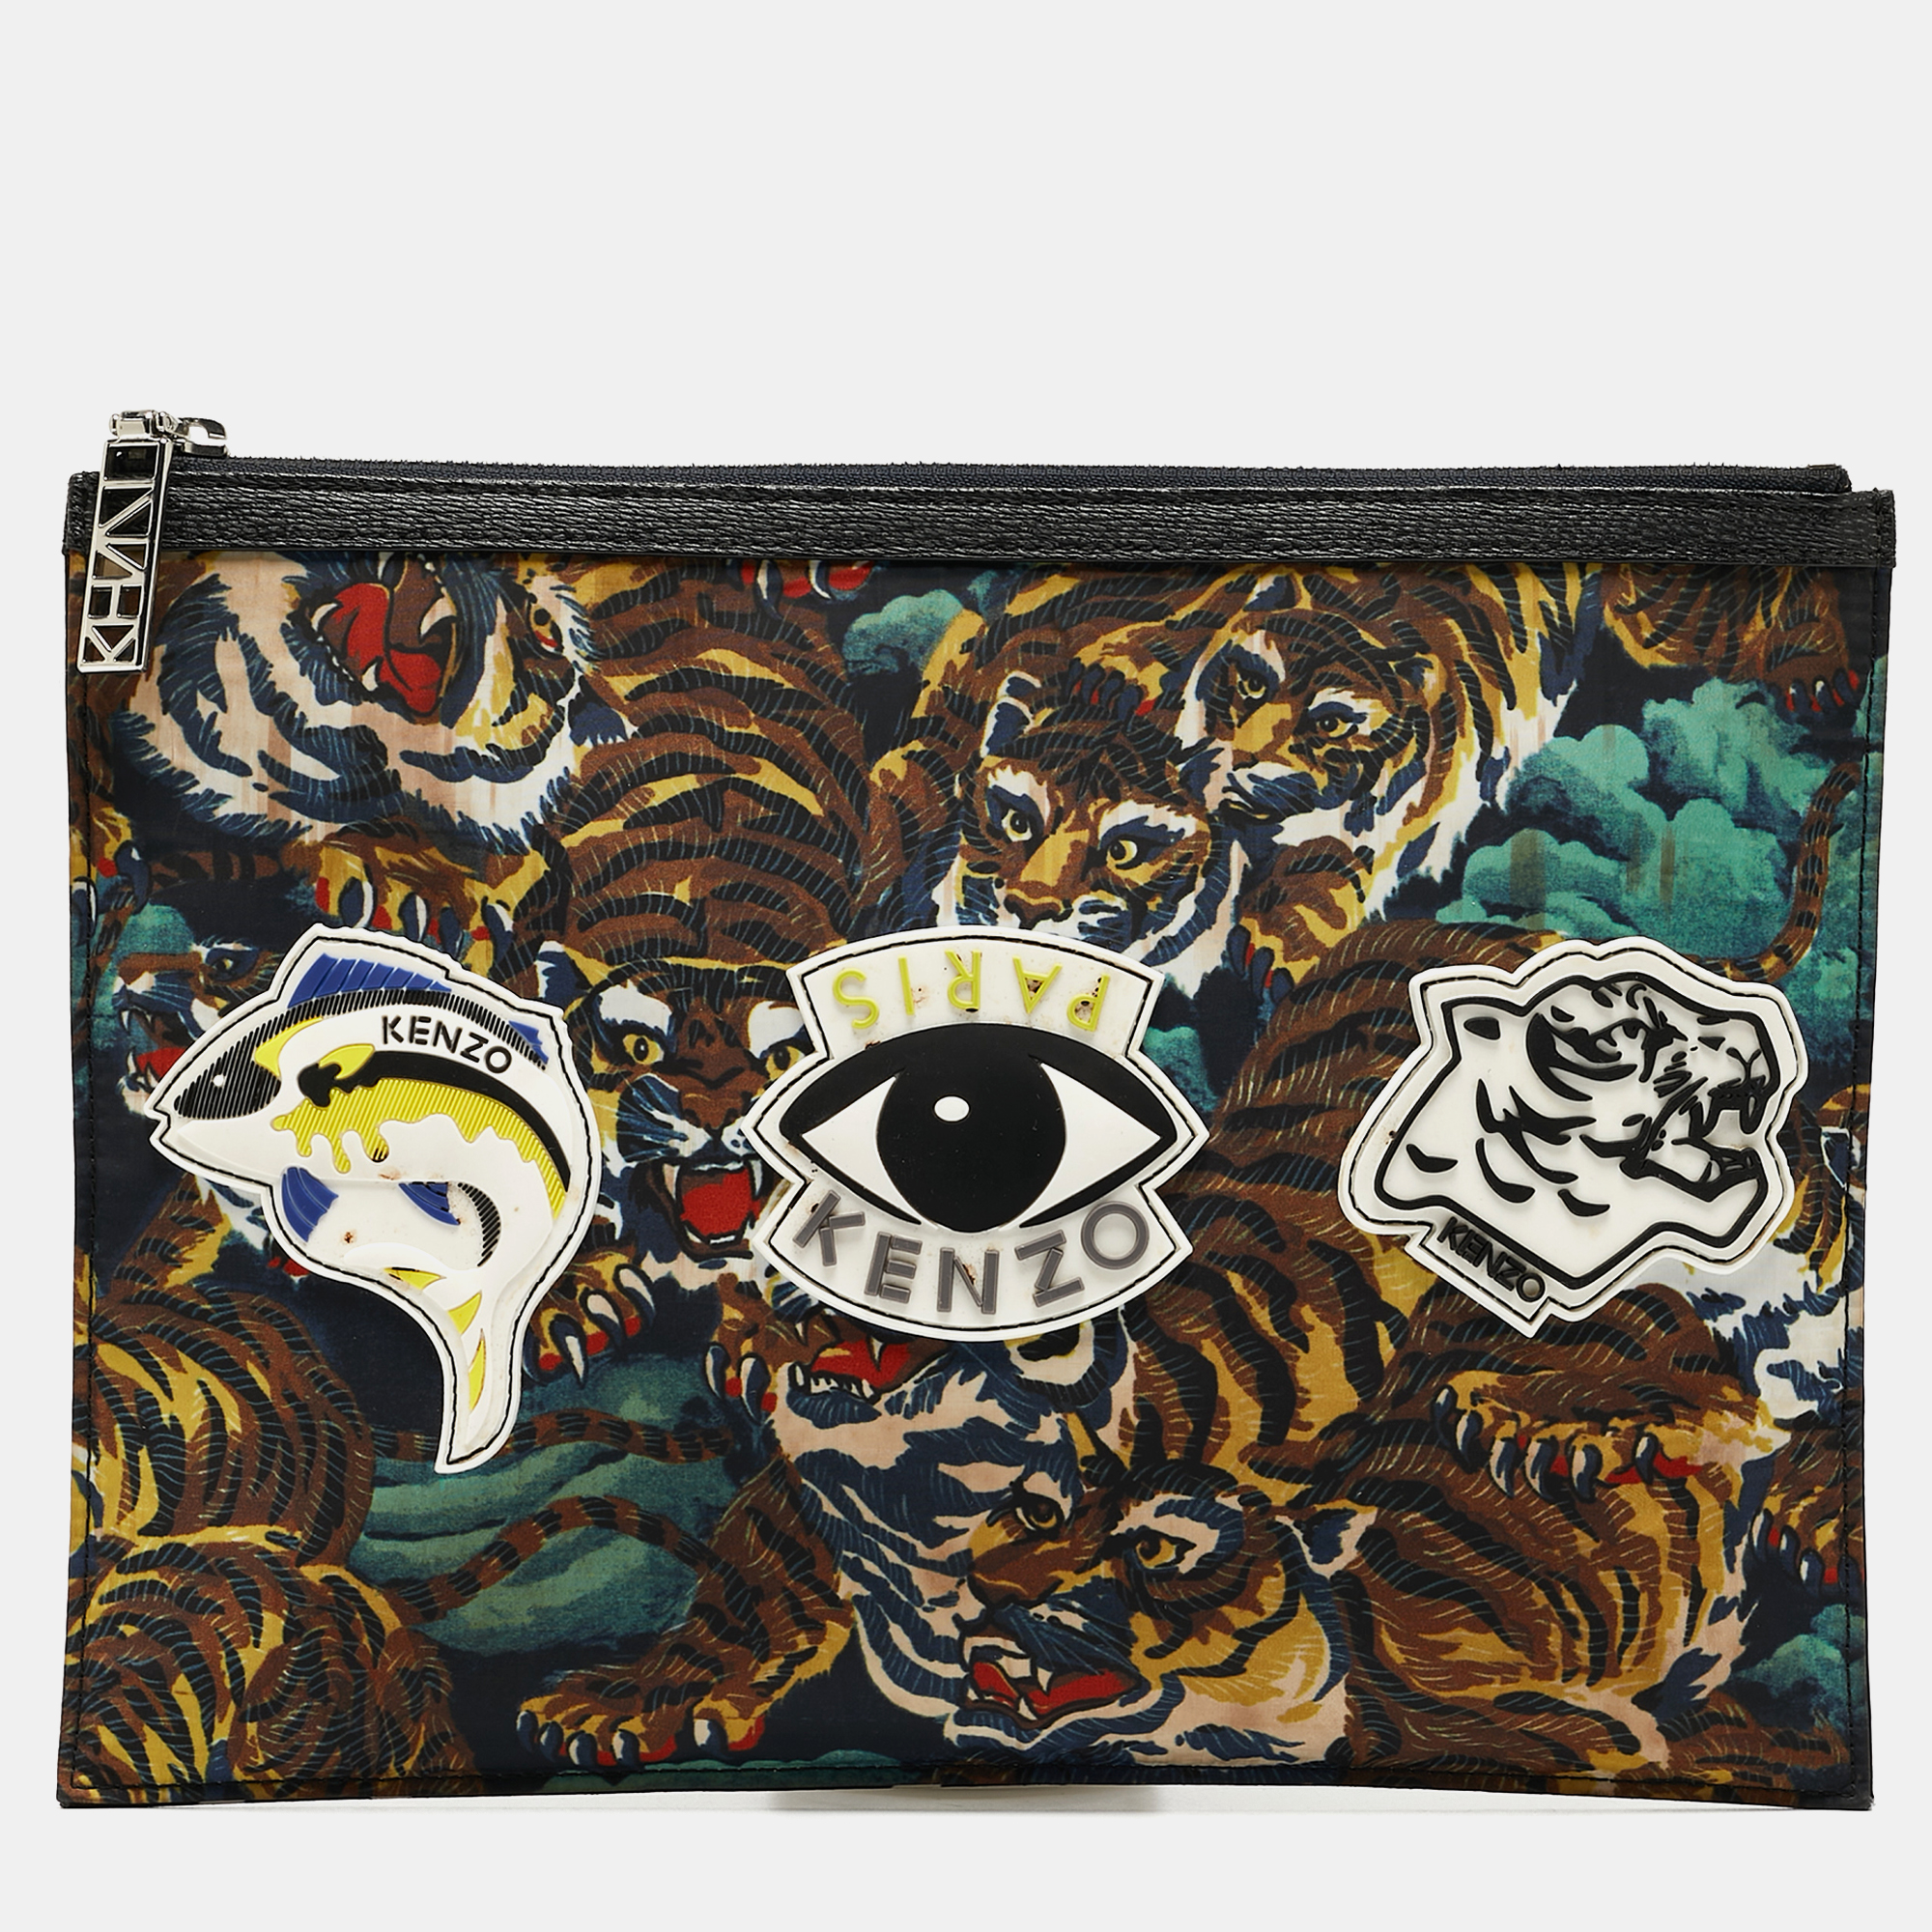 Kenzo multicolor printed nylon flying tiger zip pouch